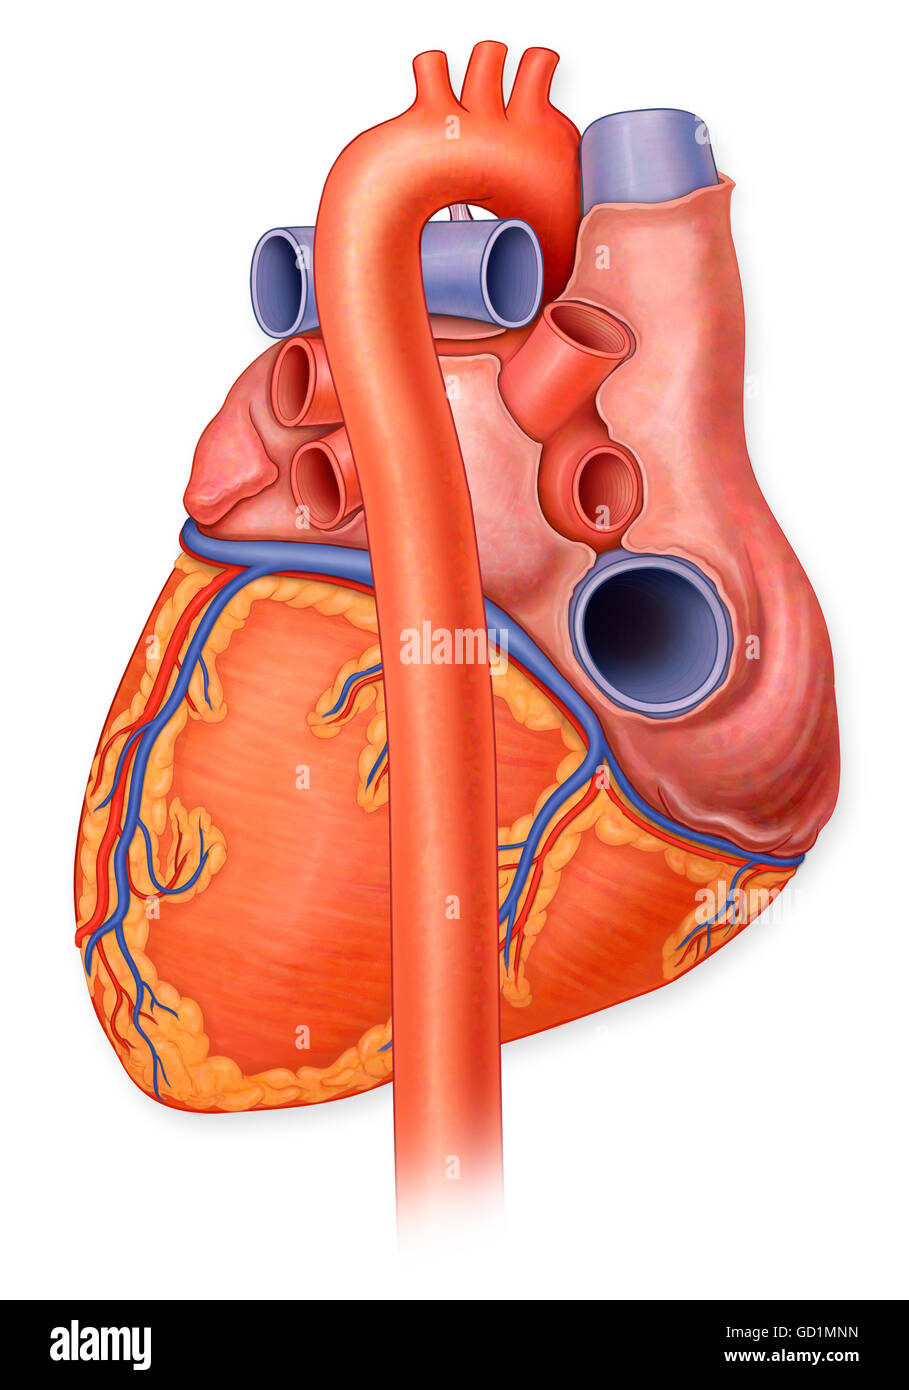 Posterior view of a normal heart and it's arteries Stock Photo